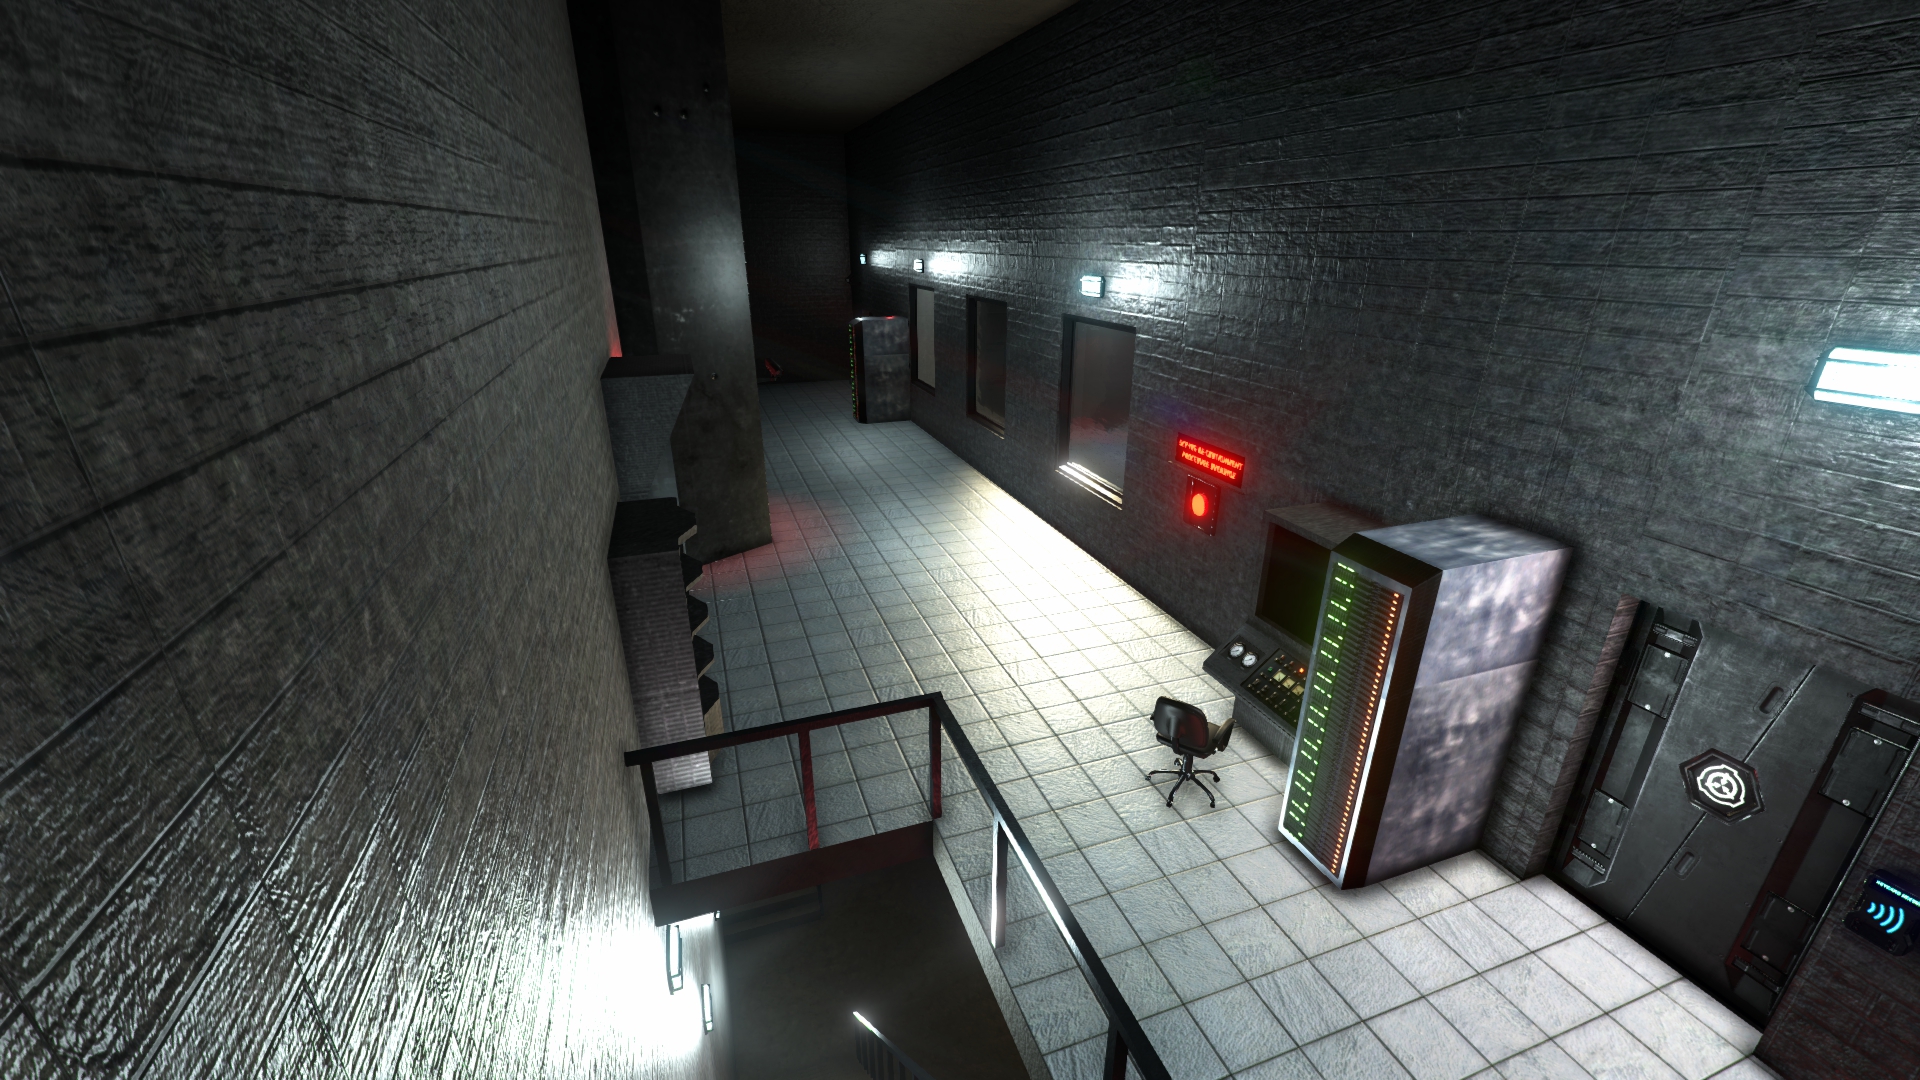 SCP Secret Laboratory (v7.0.0) - New Update! 939 added and 106 remodel 